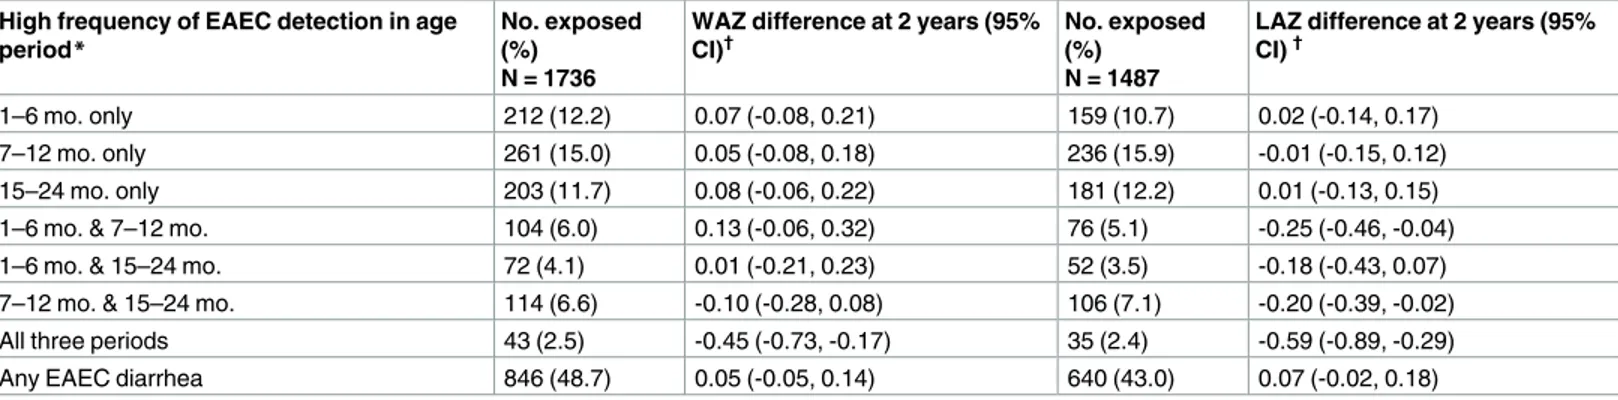 Table 3. Effects of EAEC detection in monthly surveillance stools on weight (WAZ) and length (LAZ) attainment at 2 years of age among 1,727 chil- chil-dren in the MAL-ED cohort with anthropometric measurements at 2 years.